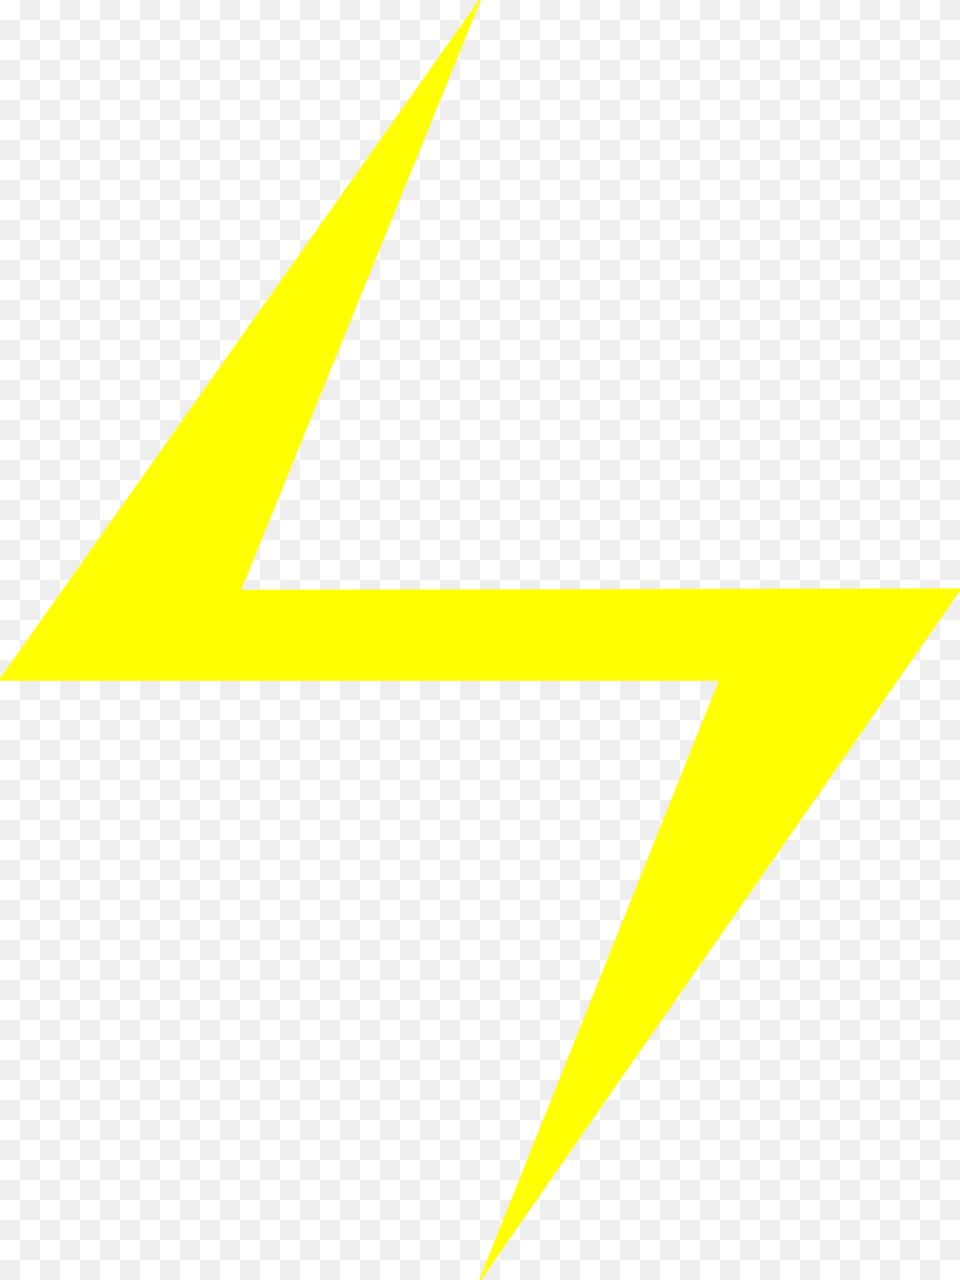 White Lightning Bolt Clipart Icons And Ms Marvel Symbol, Triangle Free Png Download